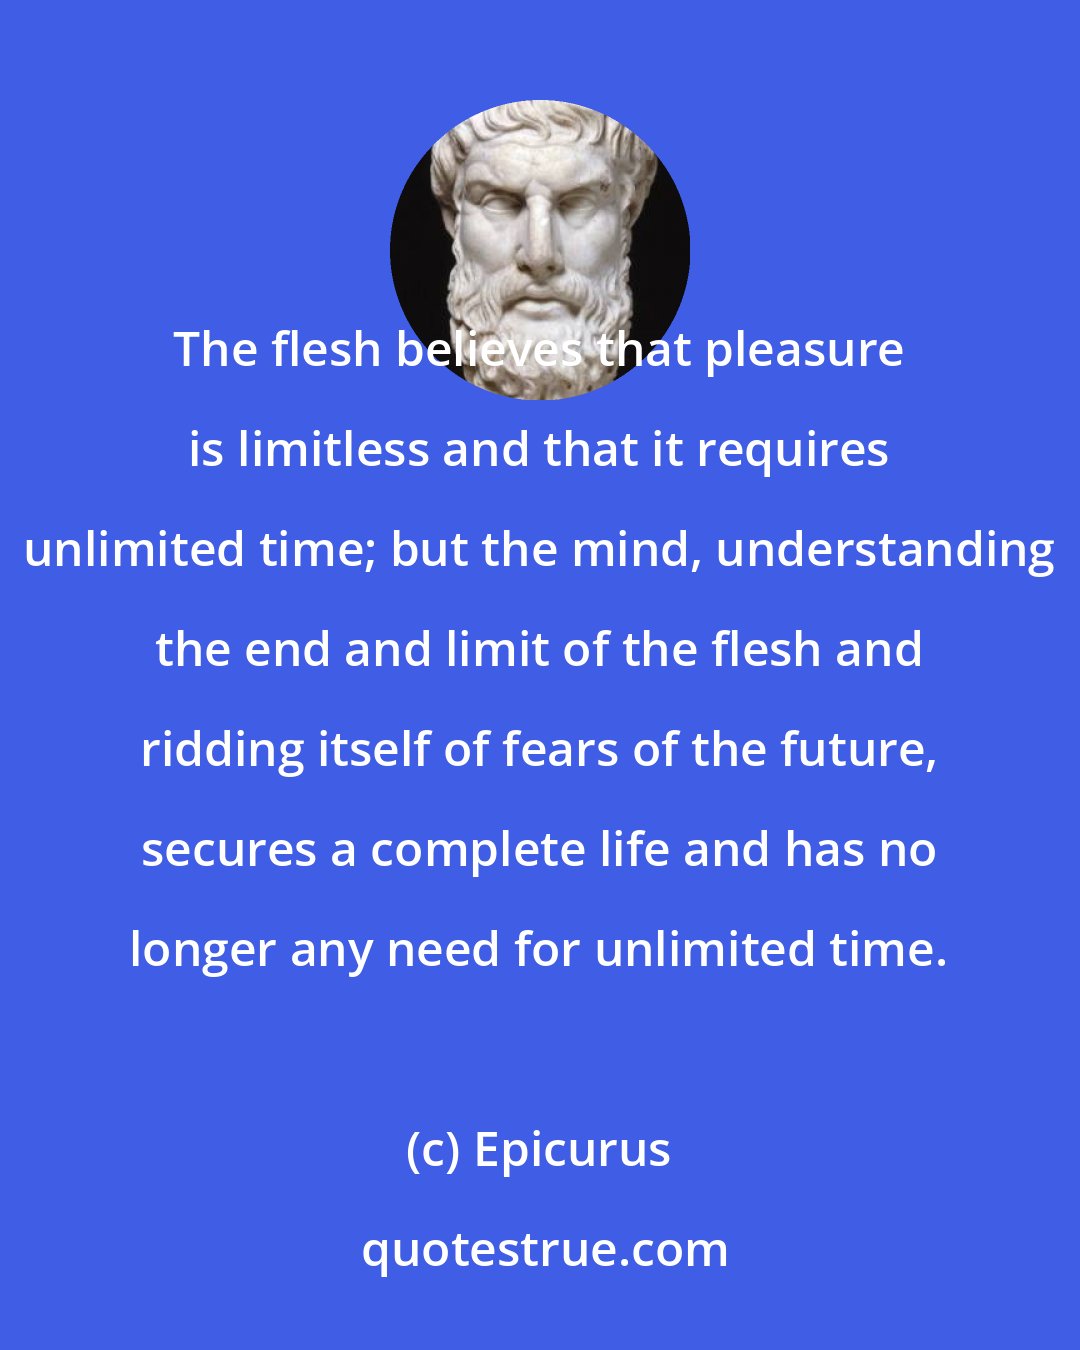 Epicurus: The flesh believes that pleasure is limitless and that it requires unlimited time; but the mind, understanding the end and limit of the flesh and ridding itself of fears of the future, secures a complete life and has no longer any need for unlimited time.